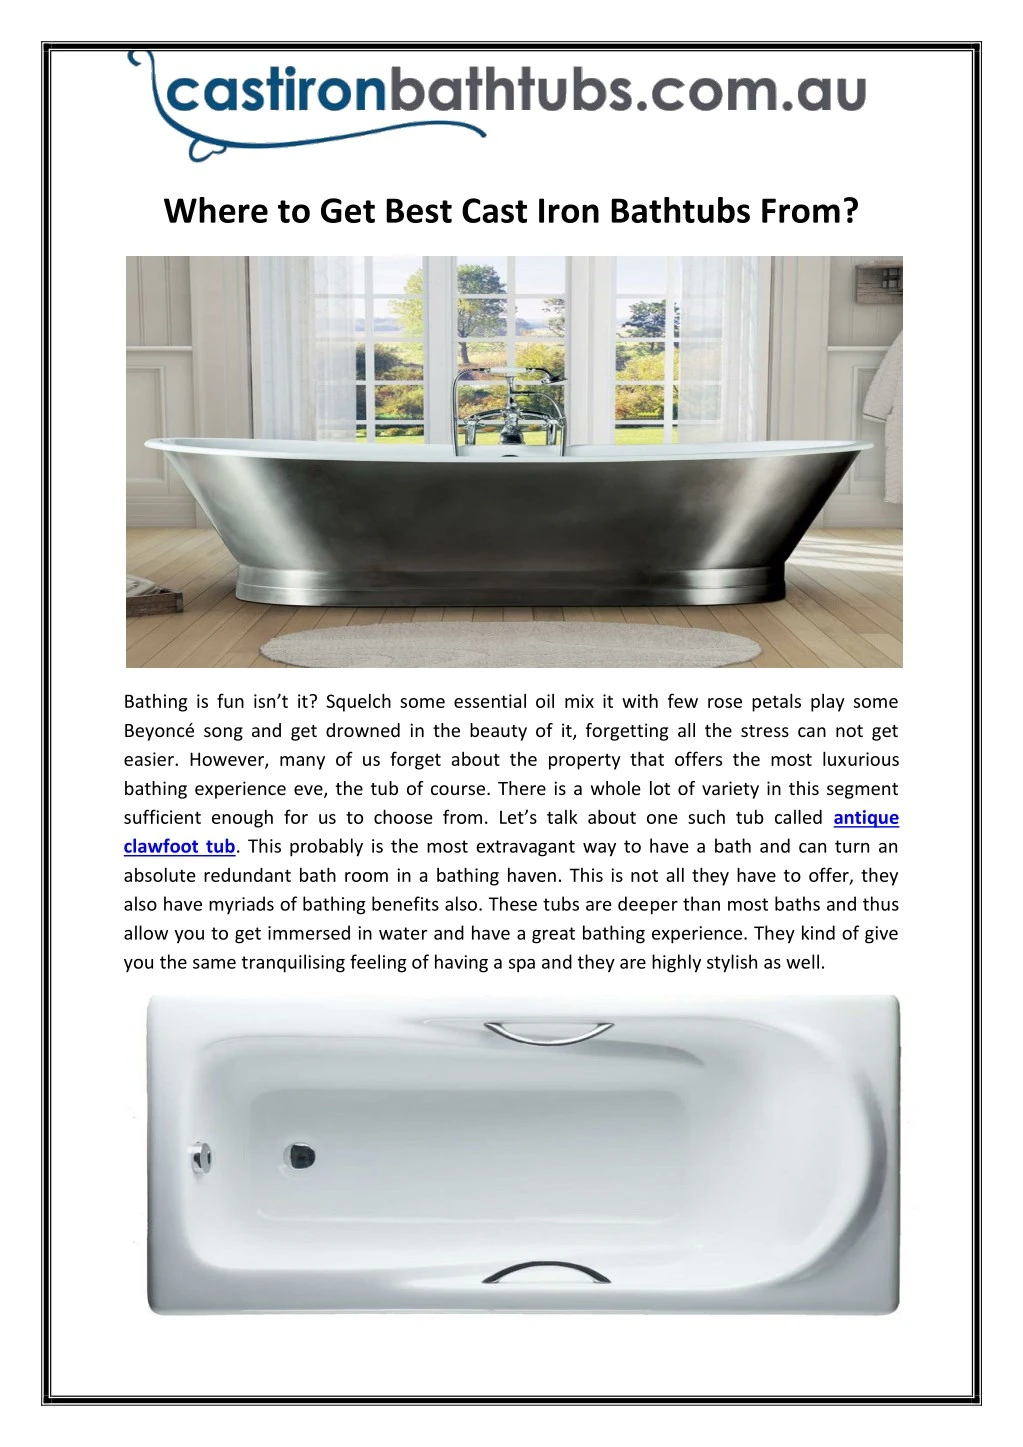 where to get best cast iron bathtubs from